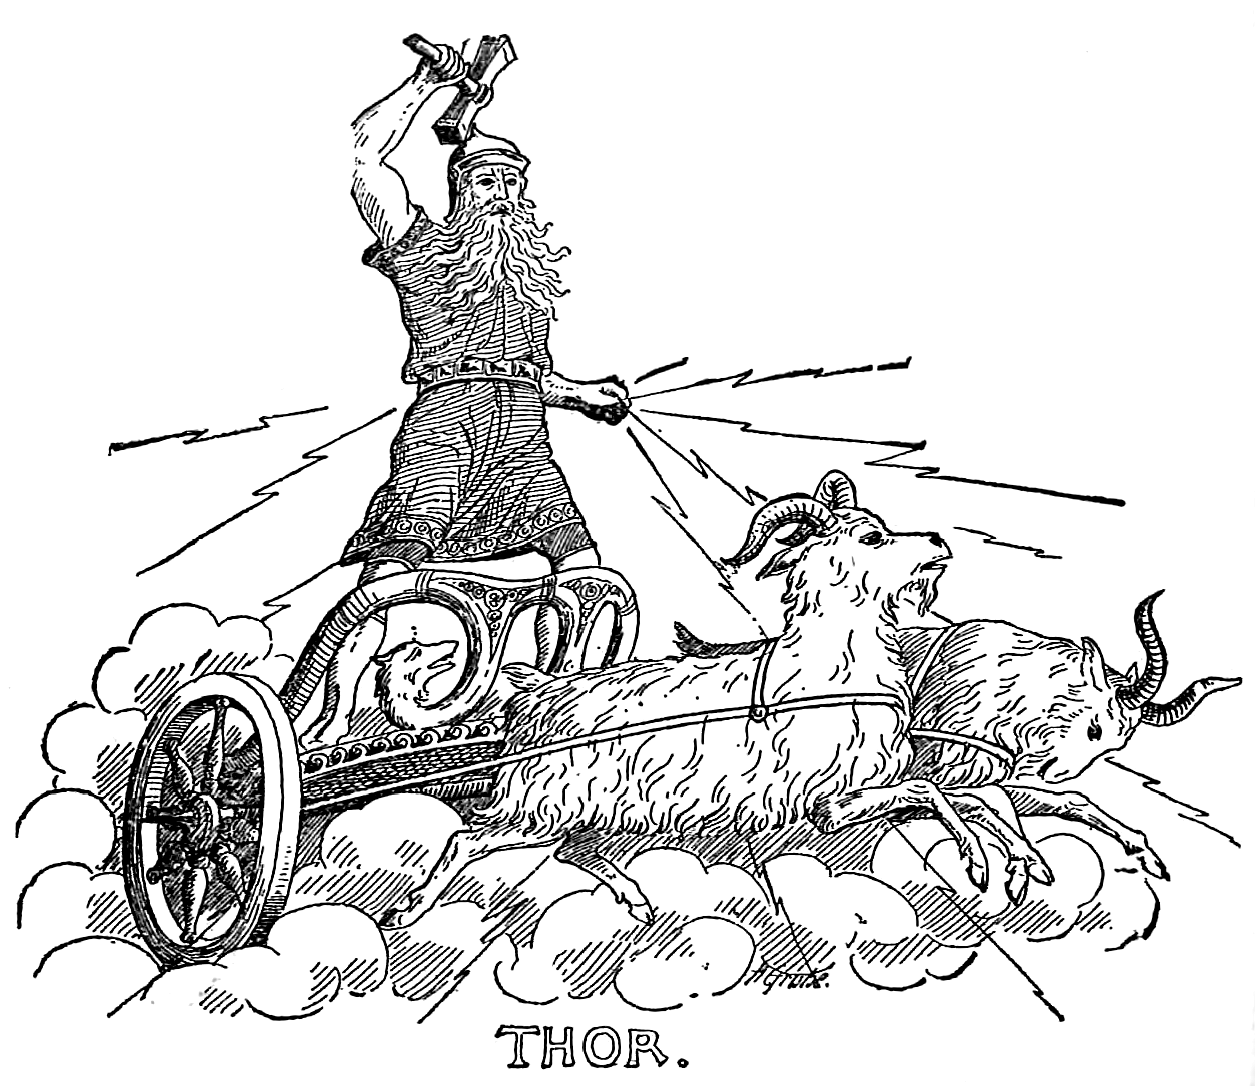 can thor fly in norse mythology